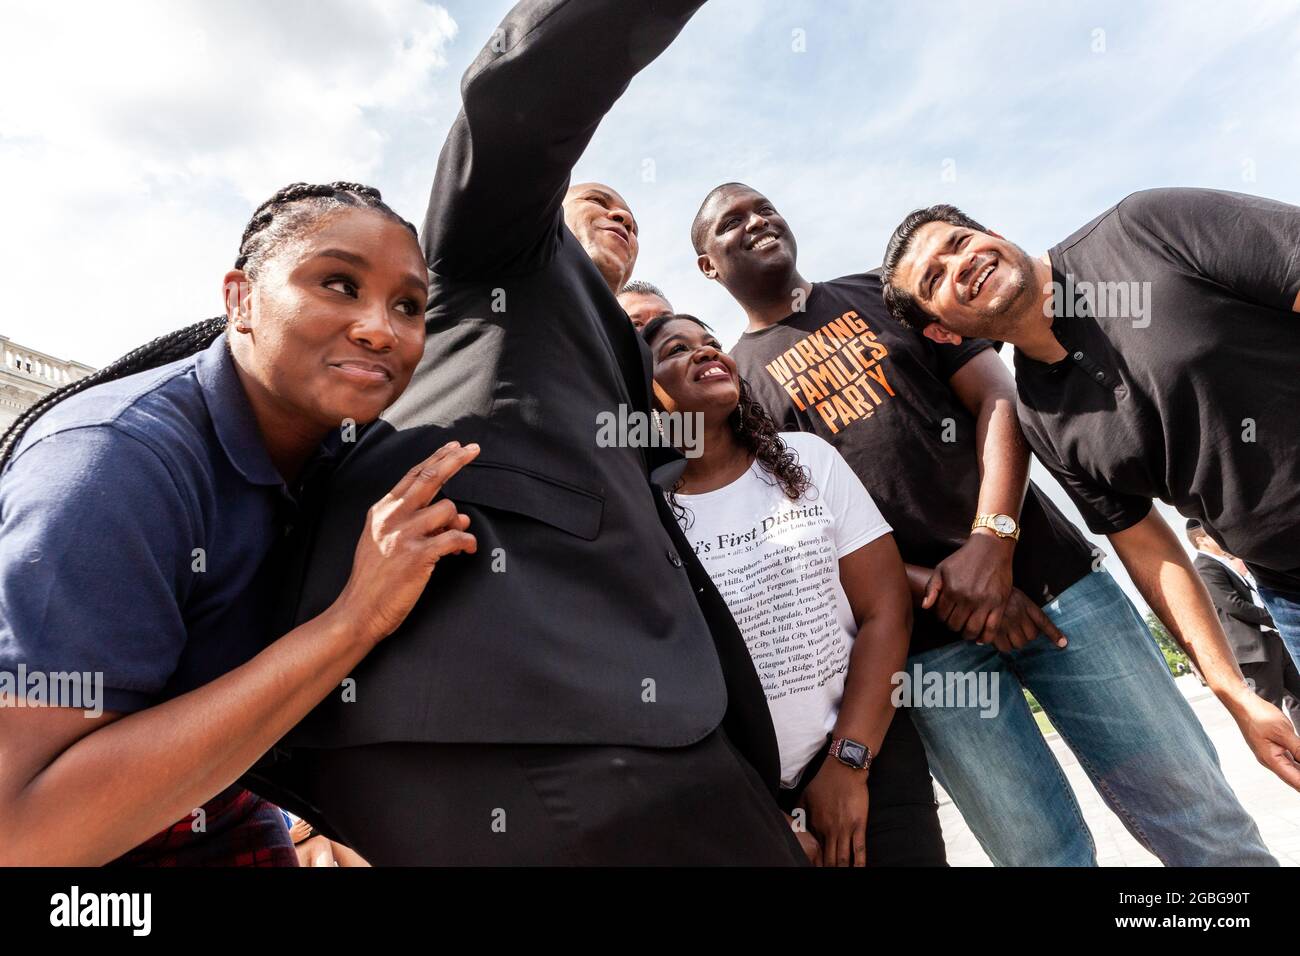 Washington, DC, USA, 3 August 2021.  Pictured: Congresswoman Cori Bush (D-MO) takes a selfie with Senators Cory Booker (D-NJ) and Alex Padilla (D-CA), Missouri state representative Raychel Proudie (D), and supporters.  Congresswoman Bush has been at the Capitol protesting the expiration of the pandemic moratorium on evictions since it ended at midnight August 1.  From left: Raychel Proudie, Cory Booker, Cori Bush, Alex Padilla (back).  Credit: Allison Bailey / Alamy Live News Stock Photo